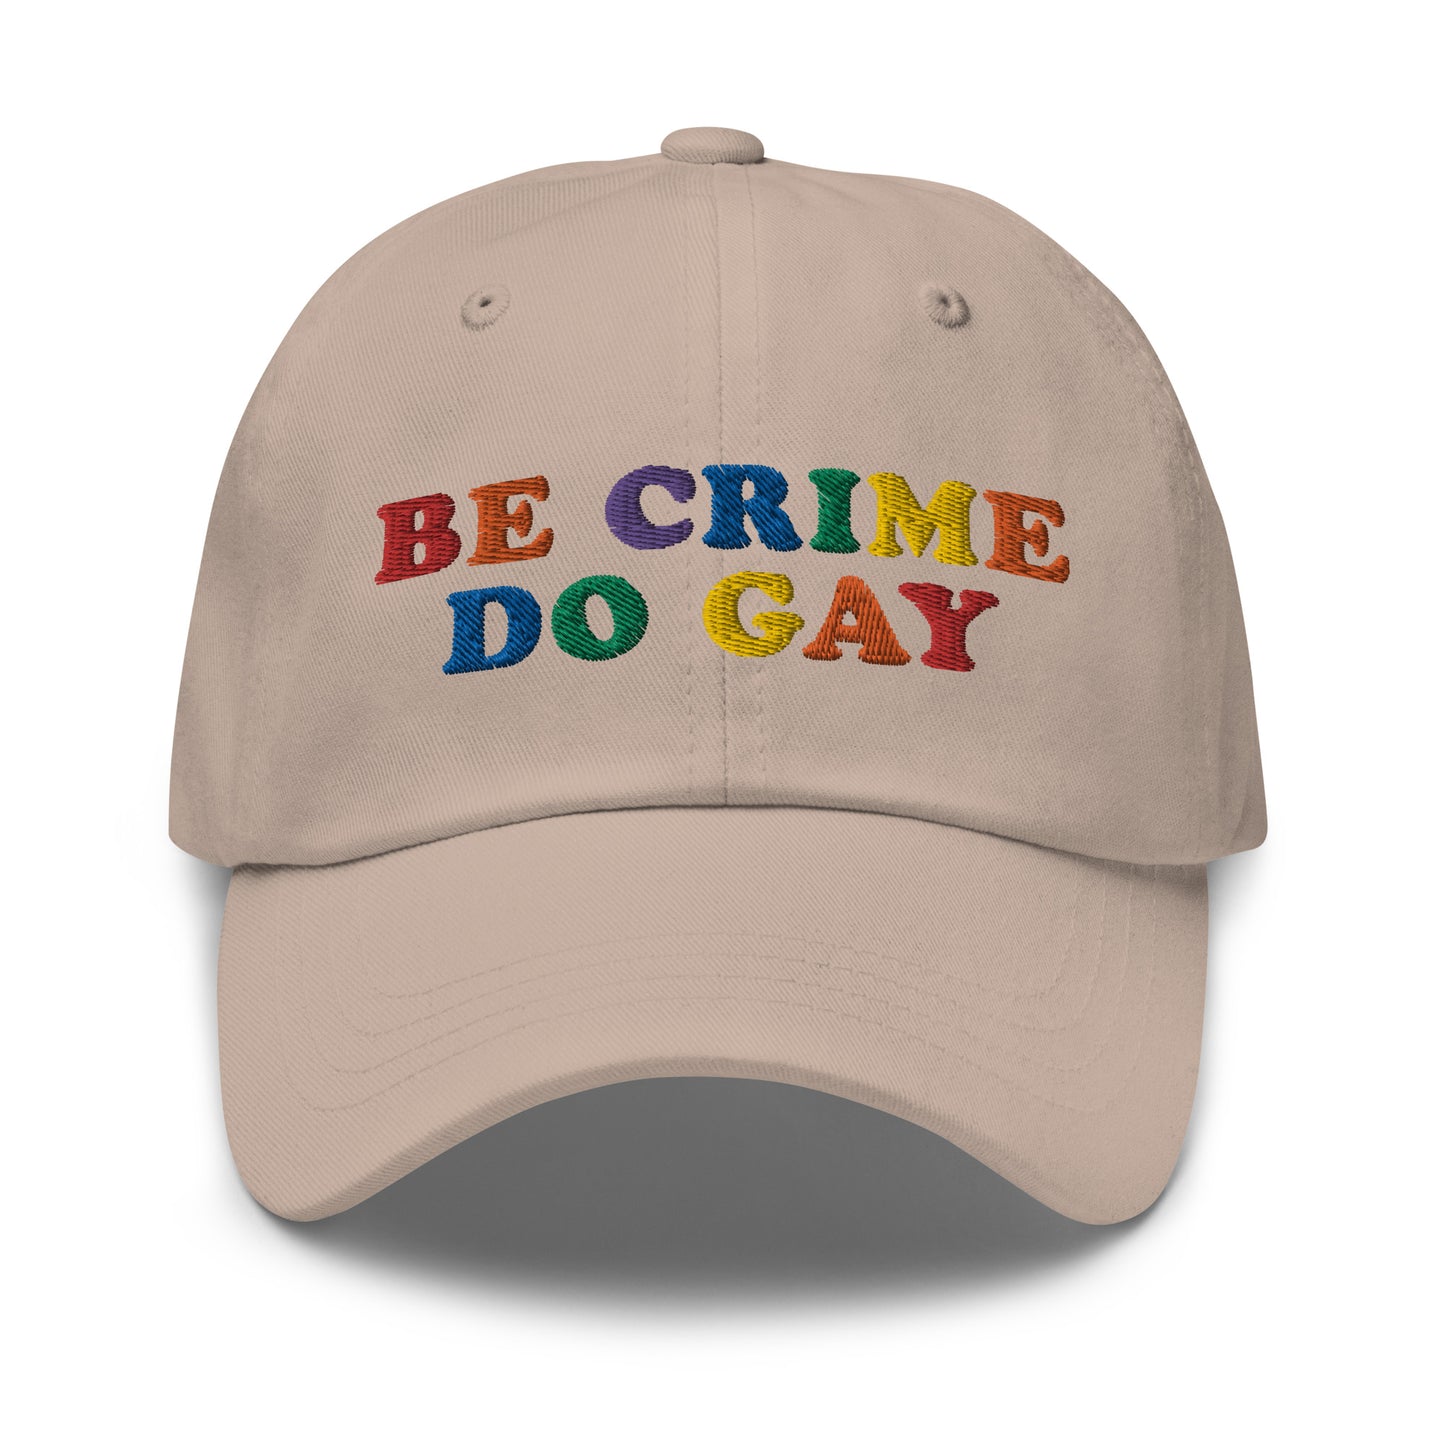 Be Crime Do Gay hat